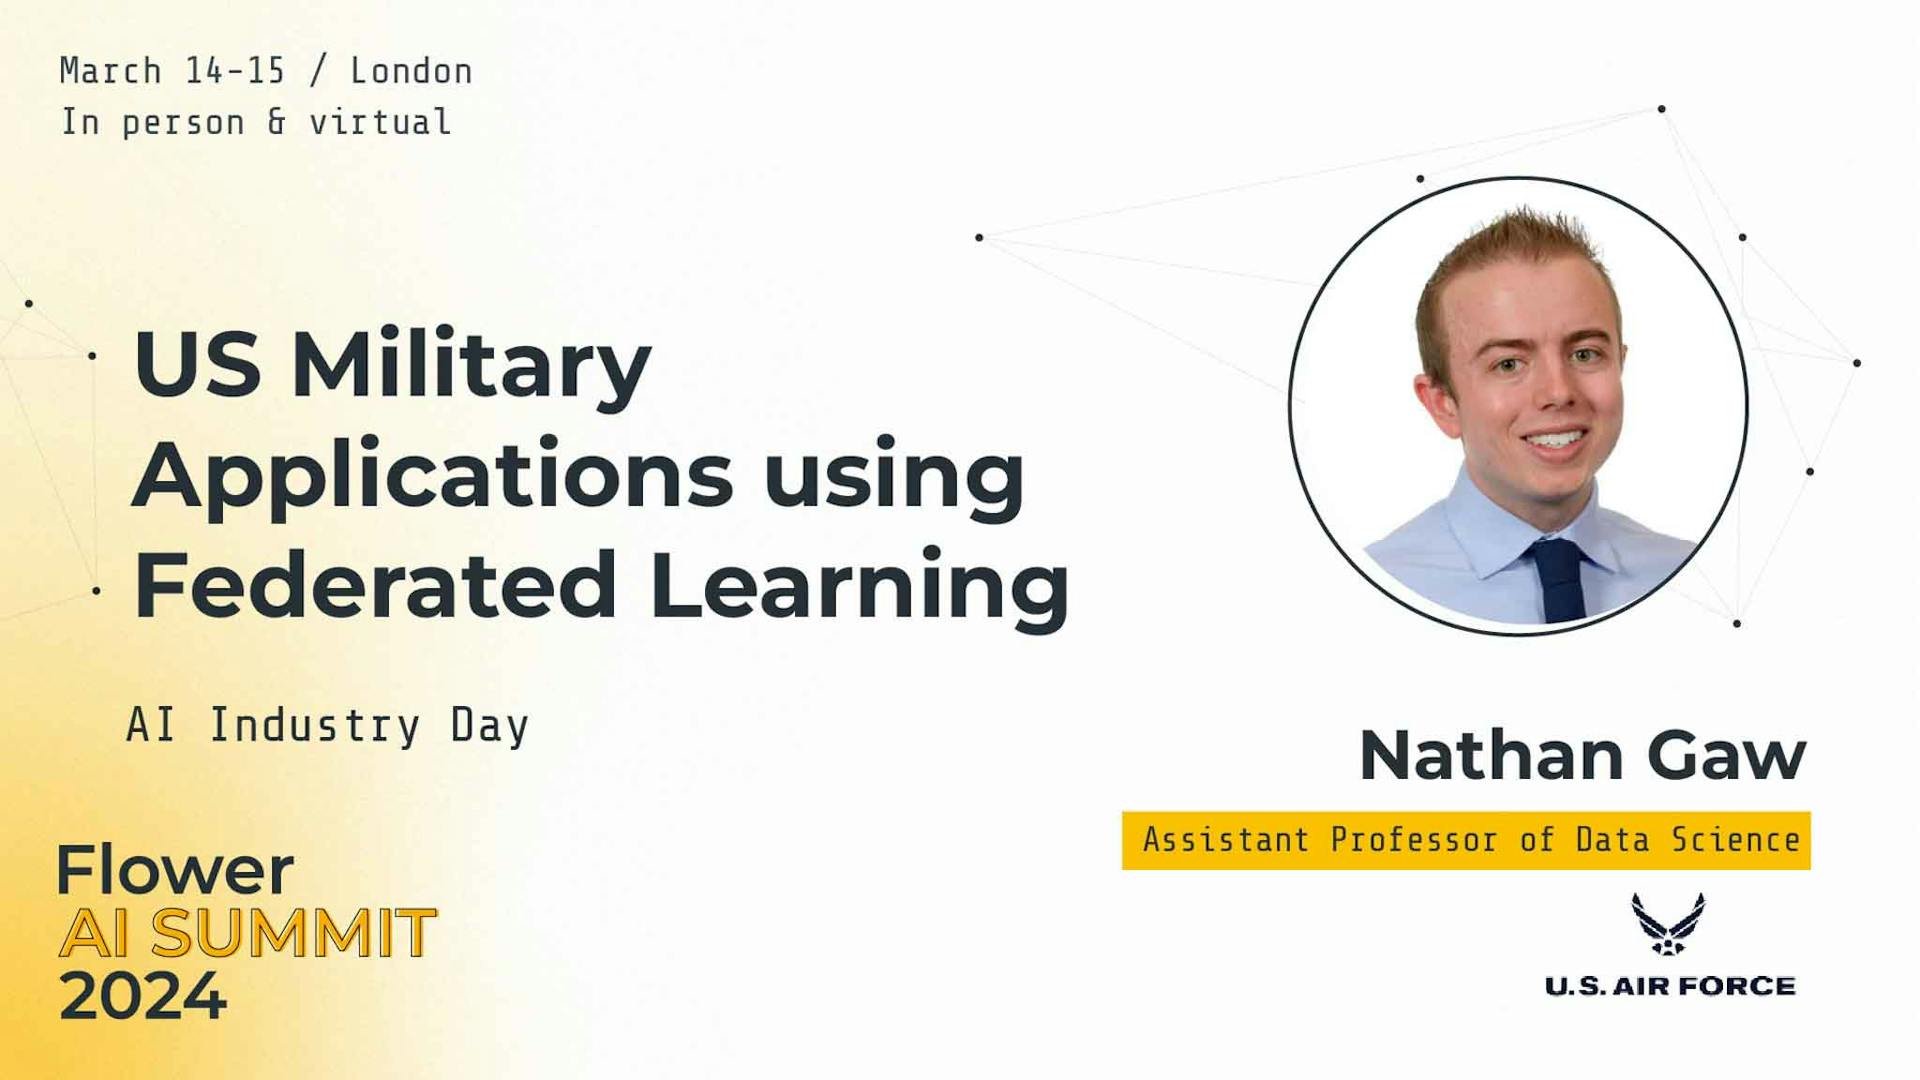 US Military Applications using Federated Learning, by Nathan Gaw